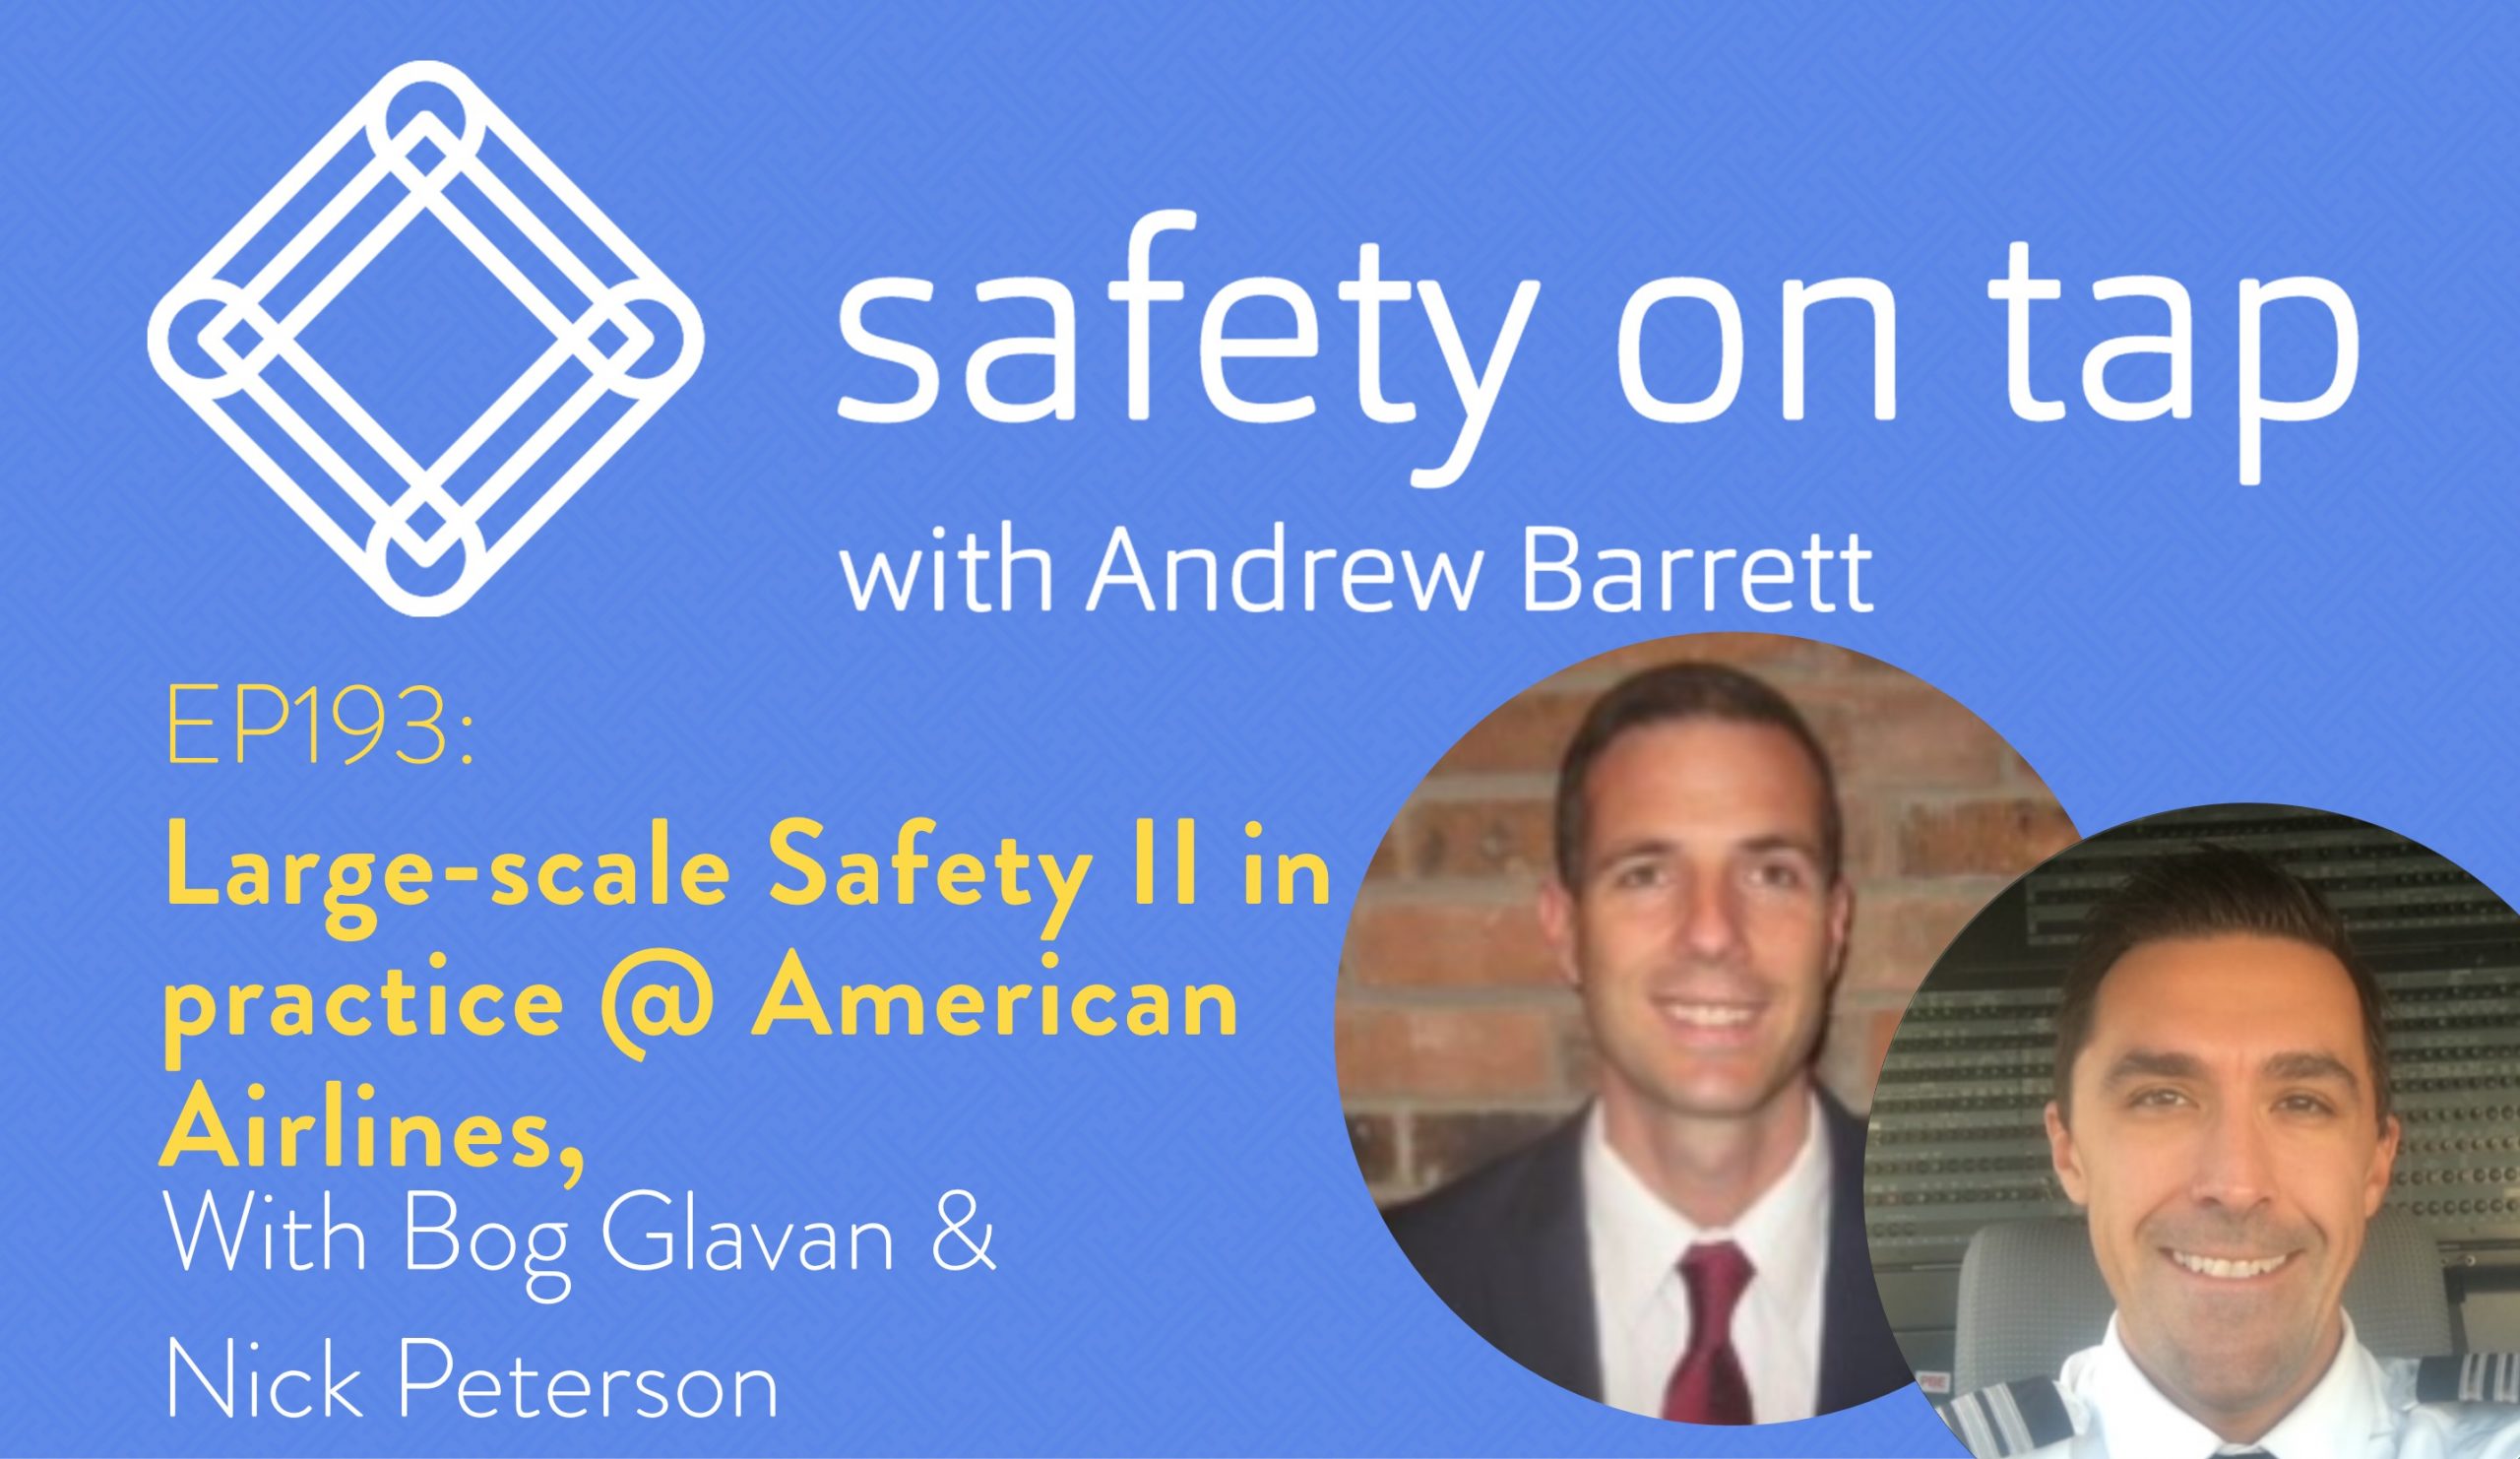 Ep193 Large-scale Safety II in practice @ American Airlines, with Bog Glavan & Nick Peterson